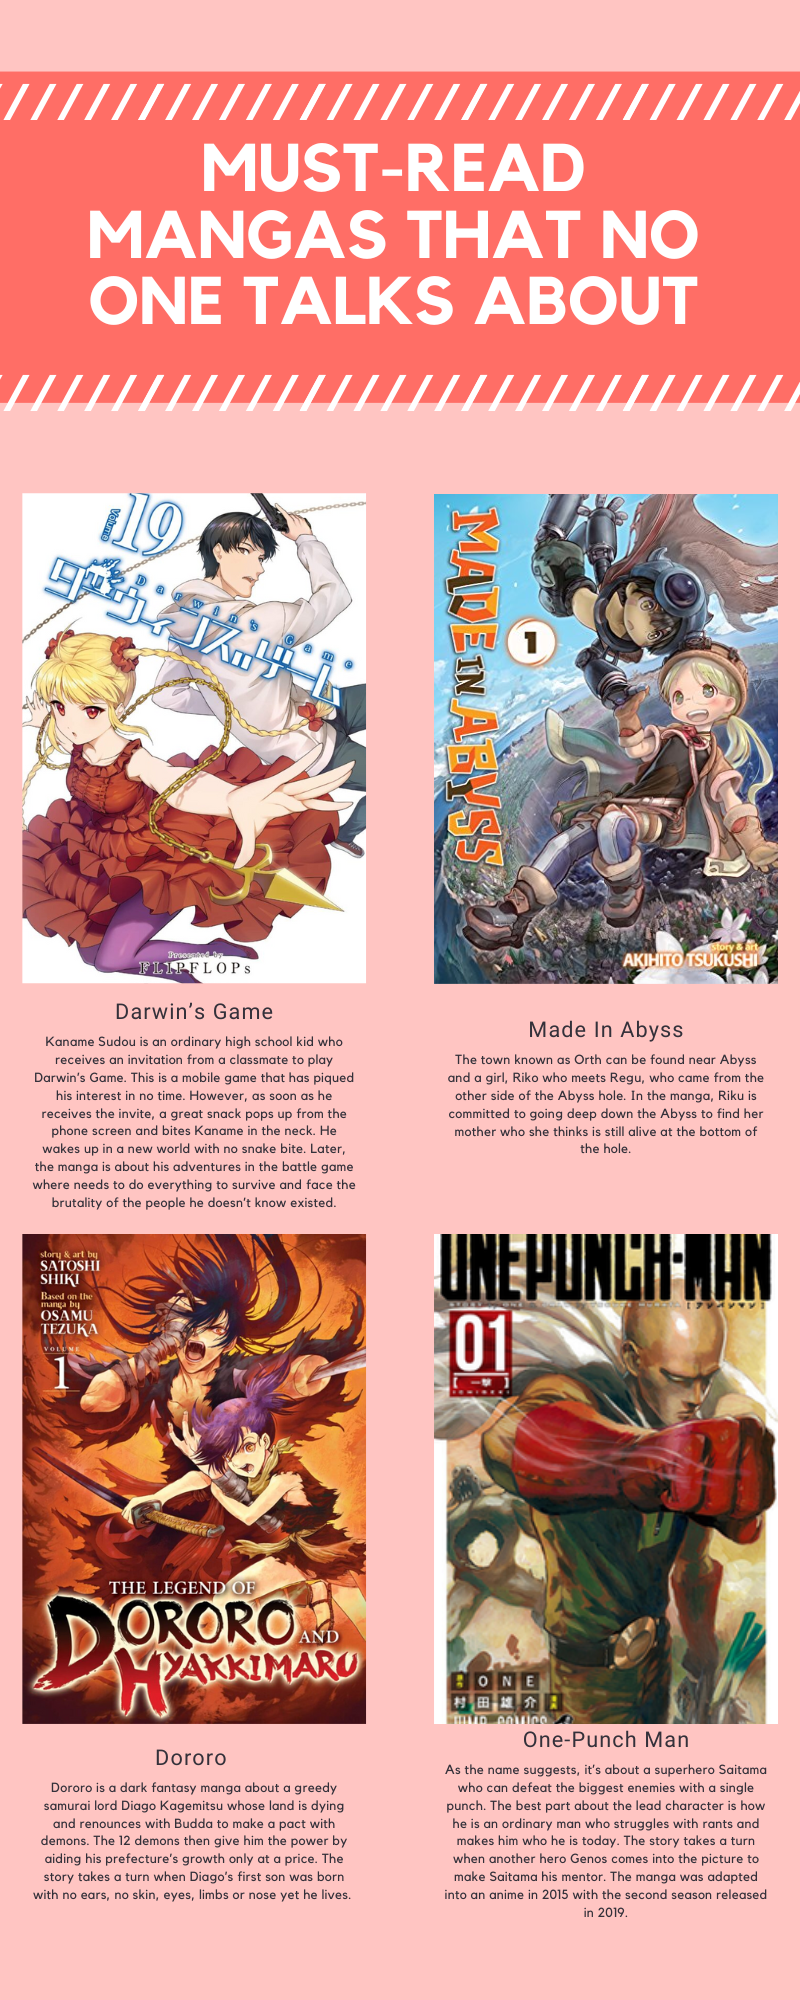 Must-Read Mangas That No One Talks About